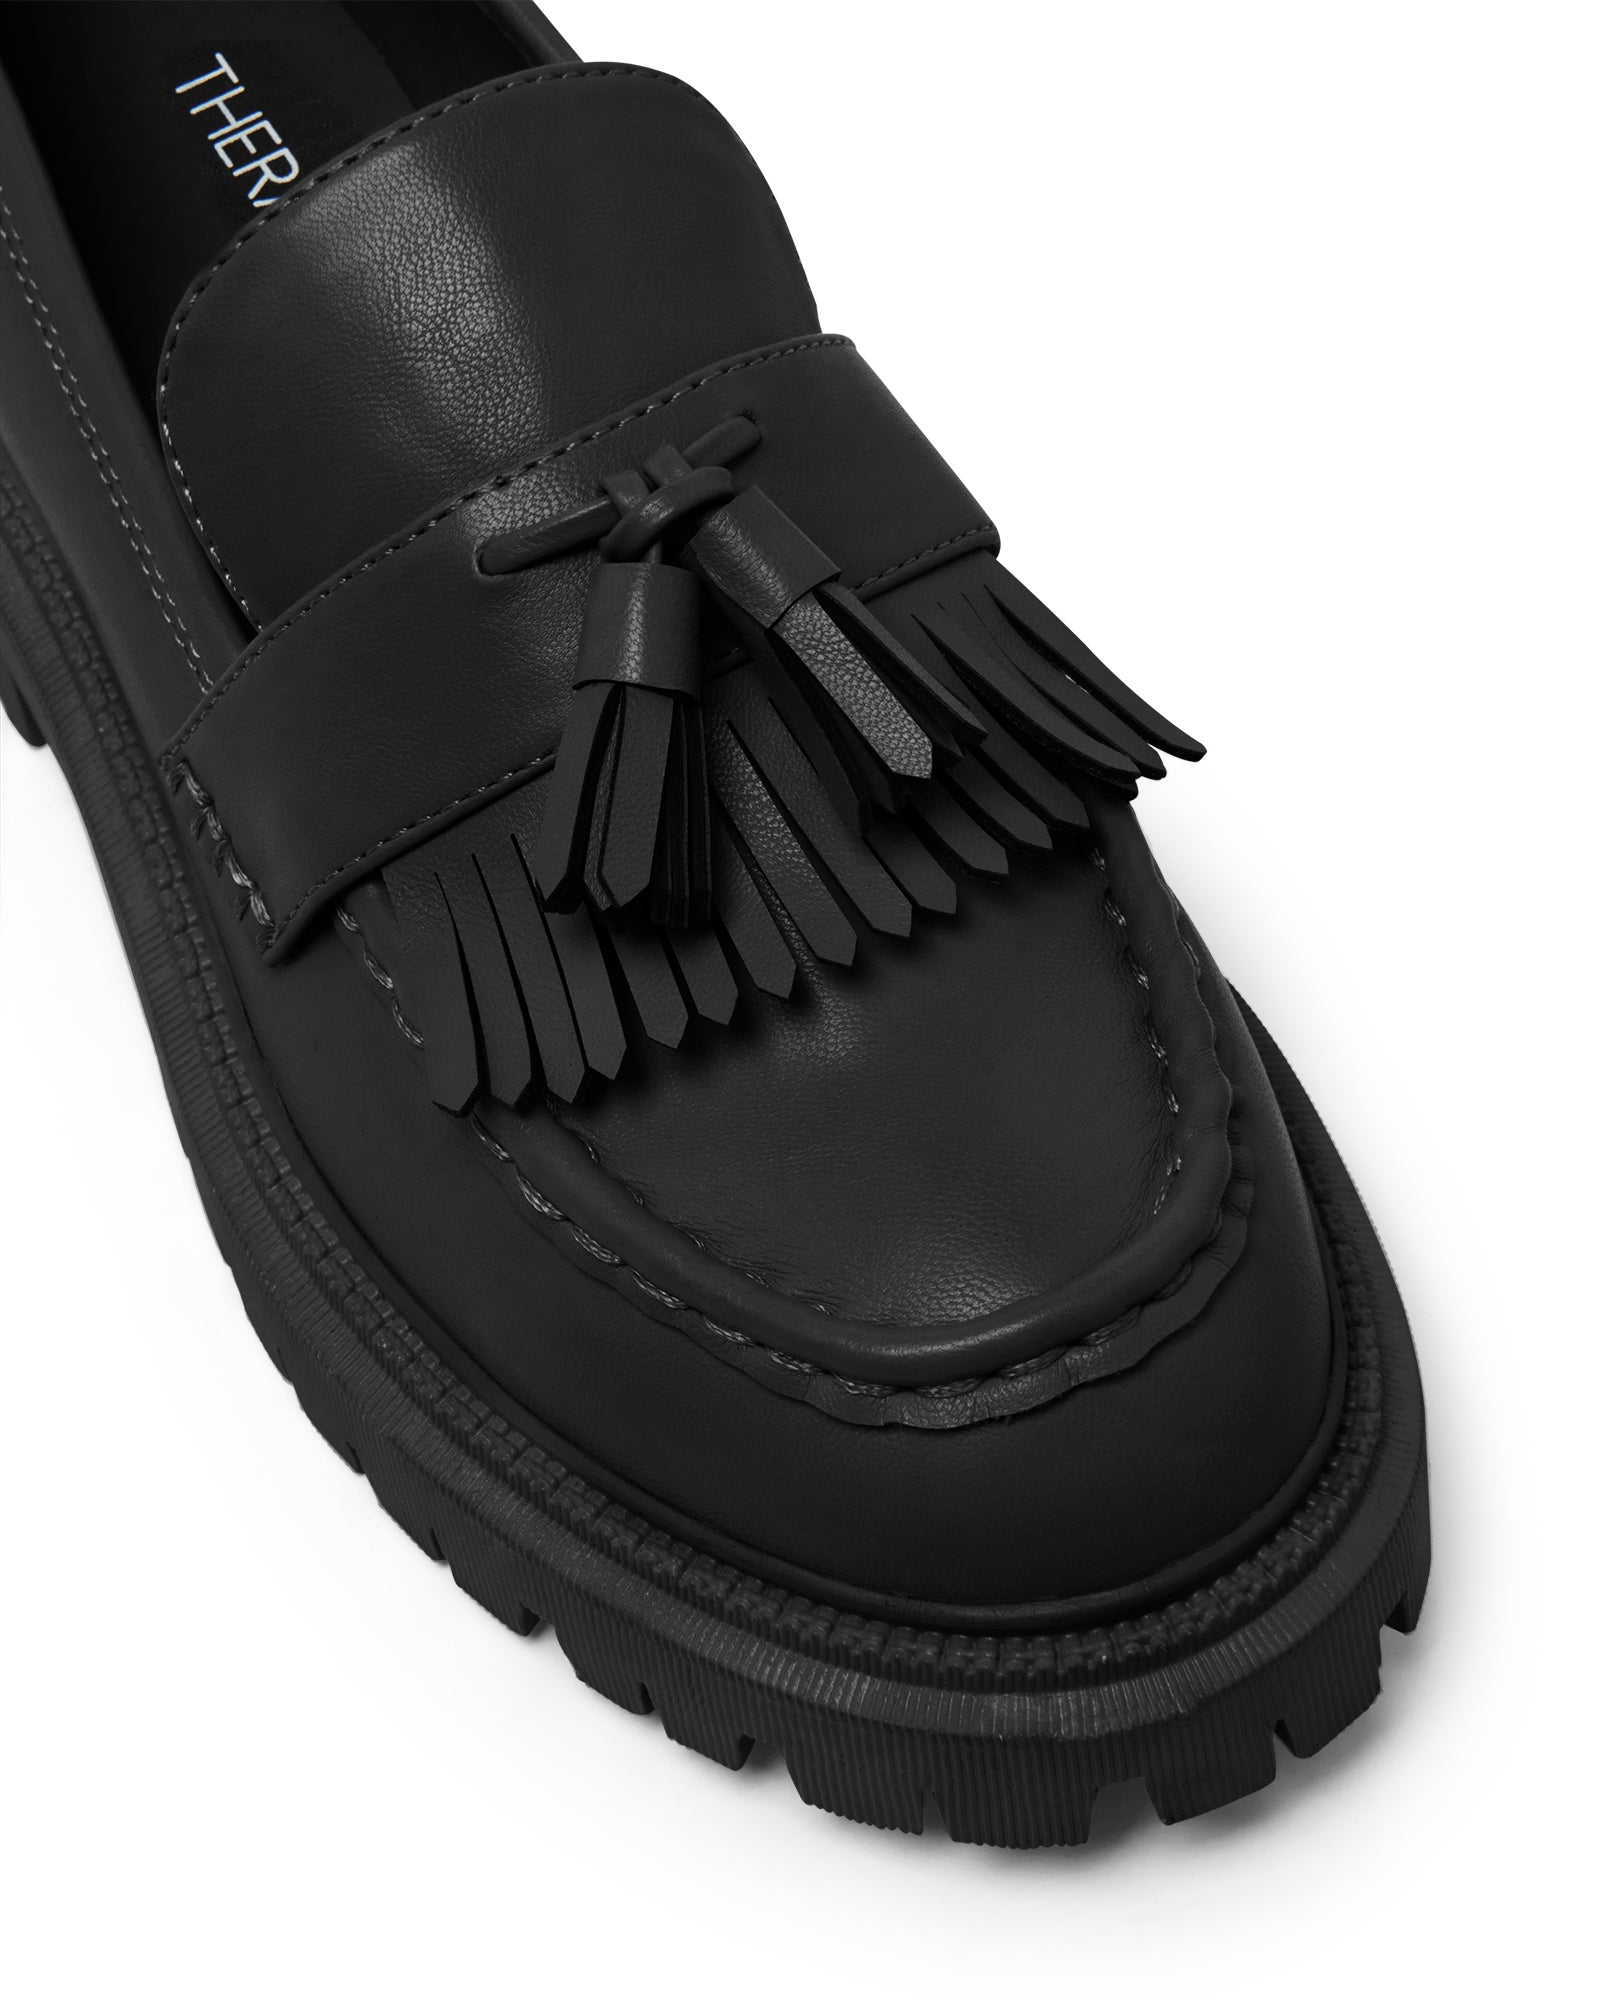 Therapy Shoes Exed Black Smooth | Women's Loafers | Chunky | Tassel | Fringe